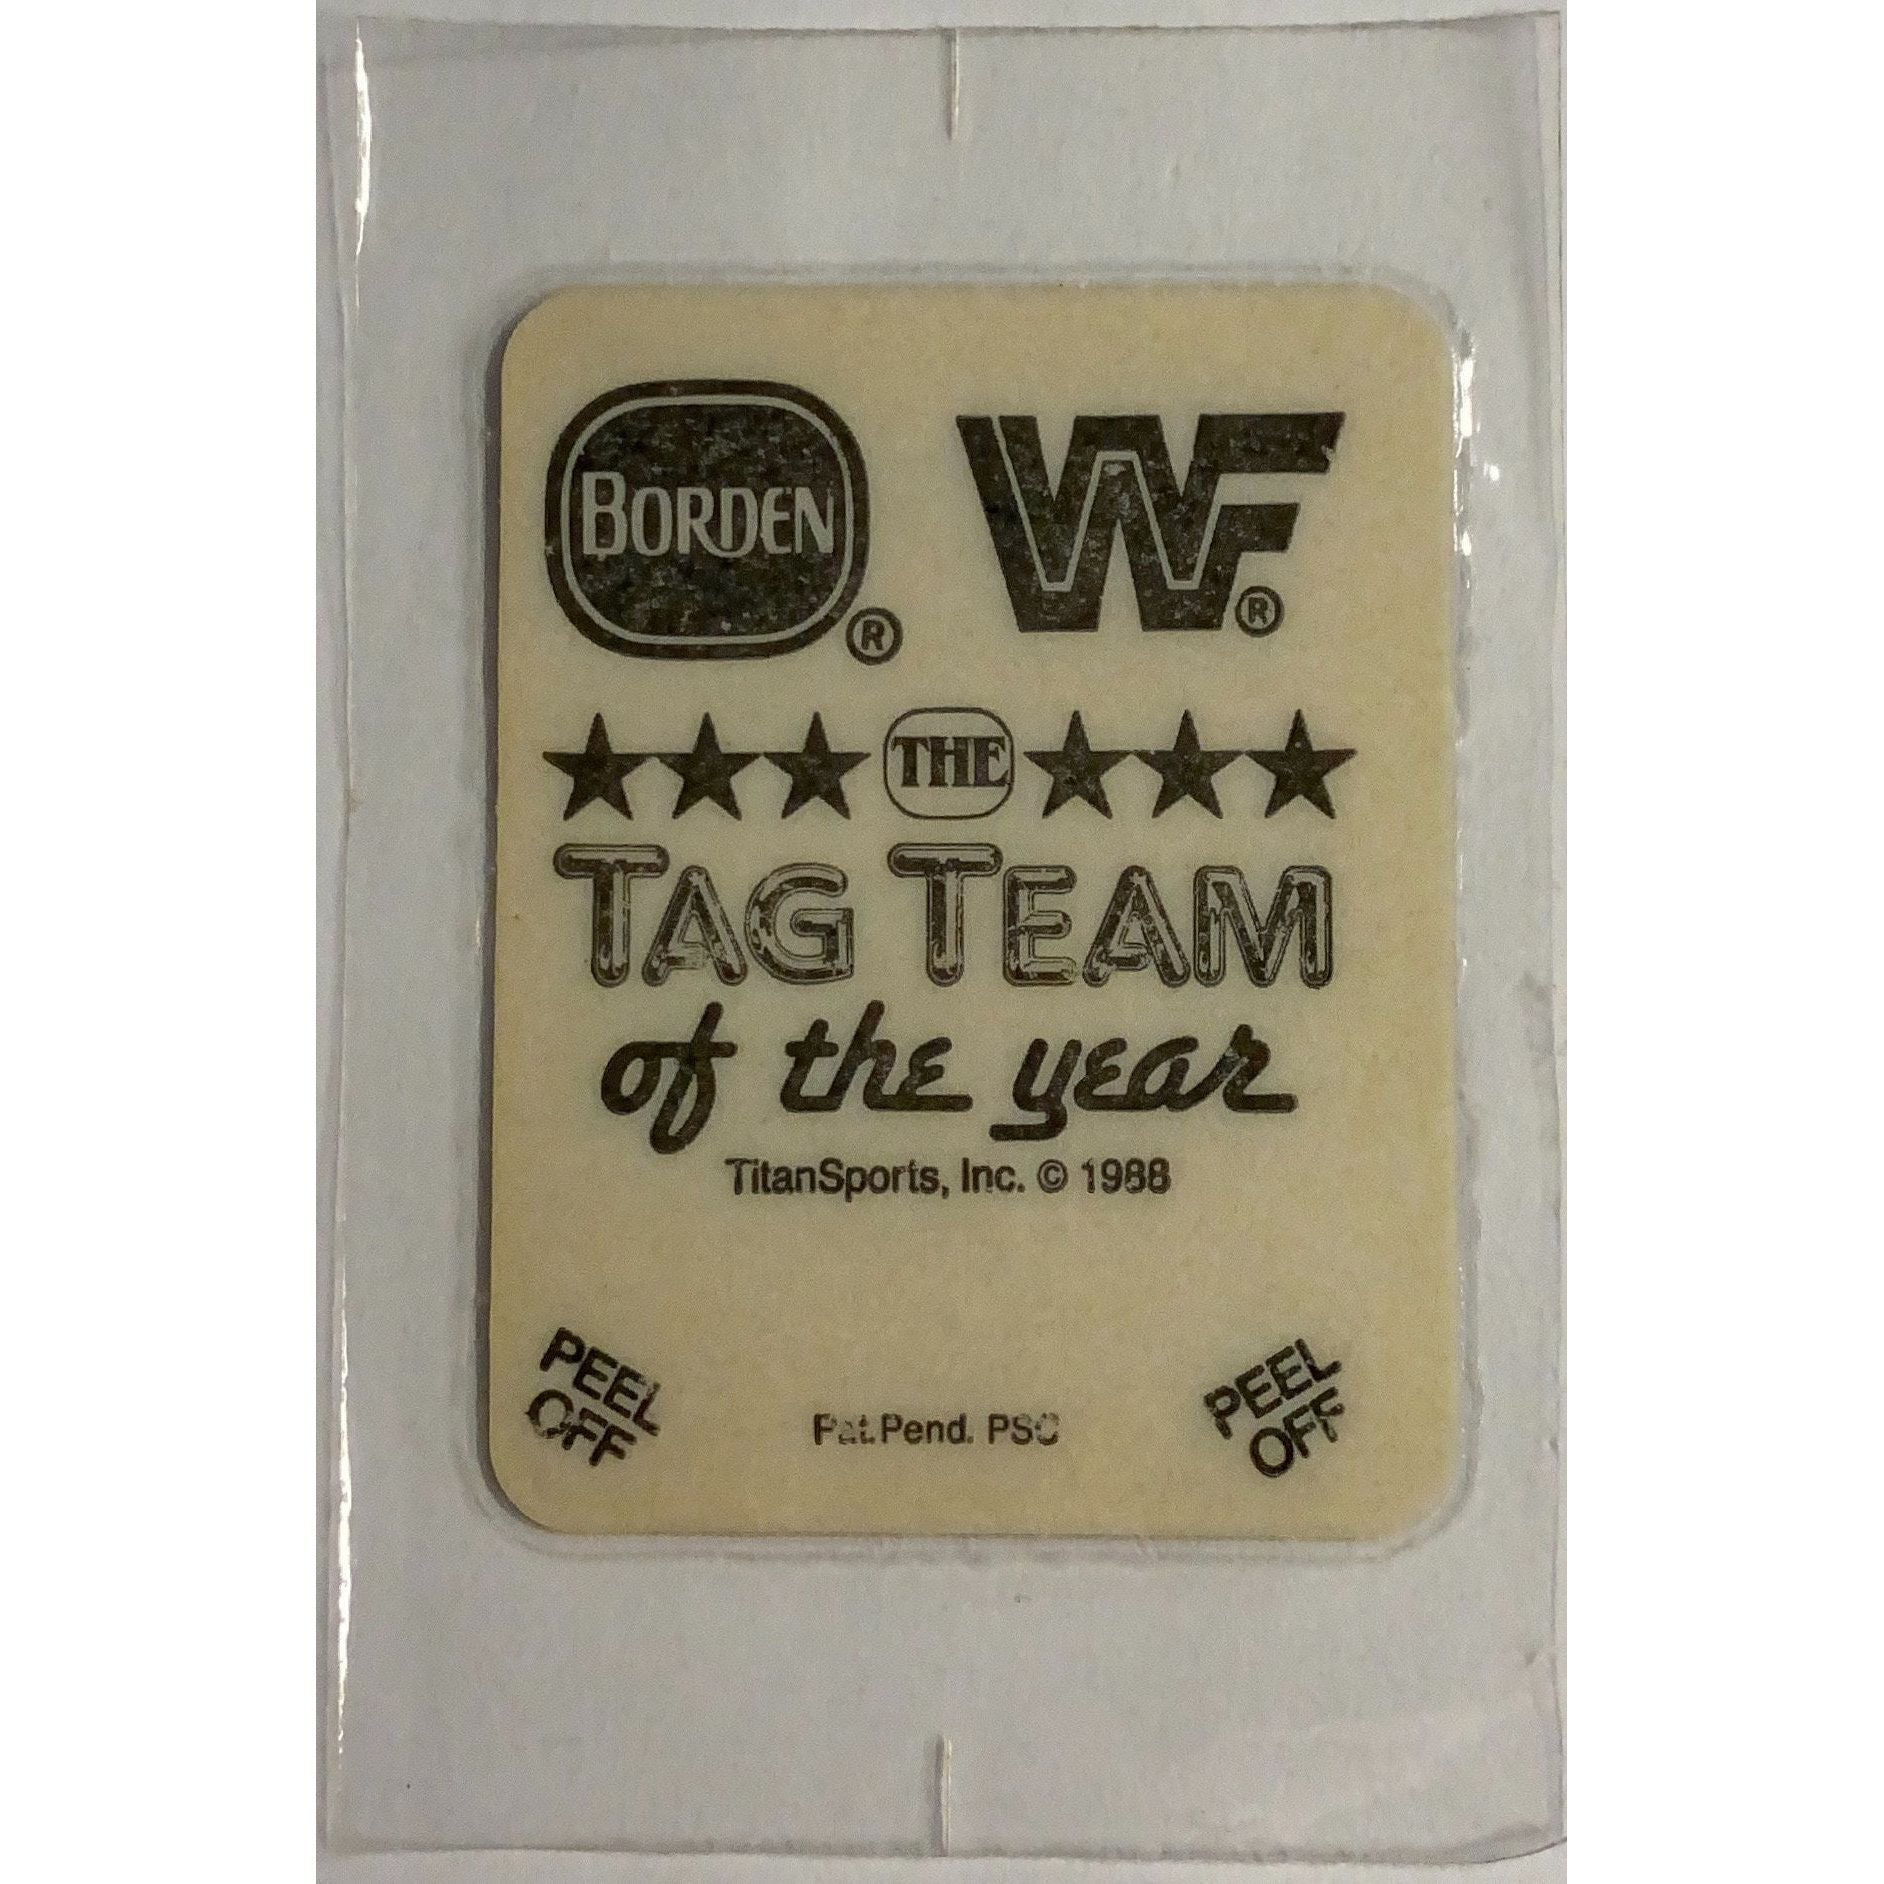  1988 Borden Titan Sports WWF Tage Team of the Year The Honky Tonk Man  Local Legends Cards & Collectibles